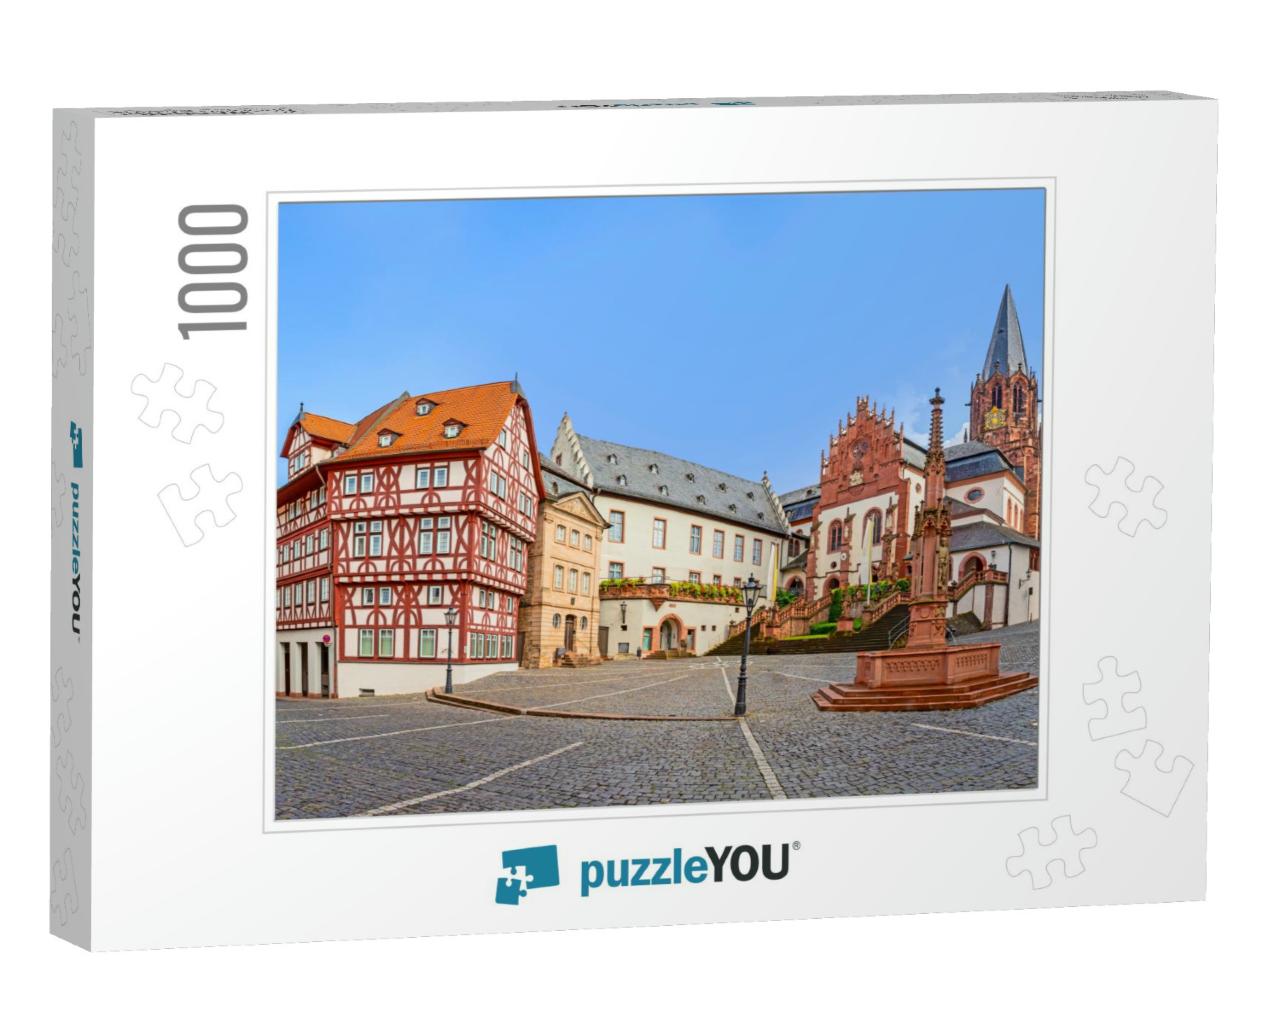 Famous Old Stifts Basilika in Aschaffenburg At Stiftskirc... Jigsaw Puzzle with 1000 pieces